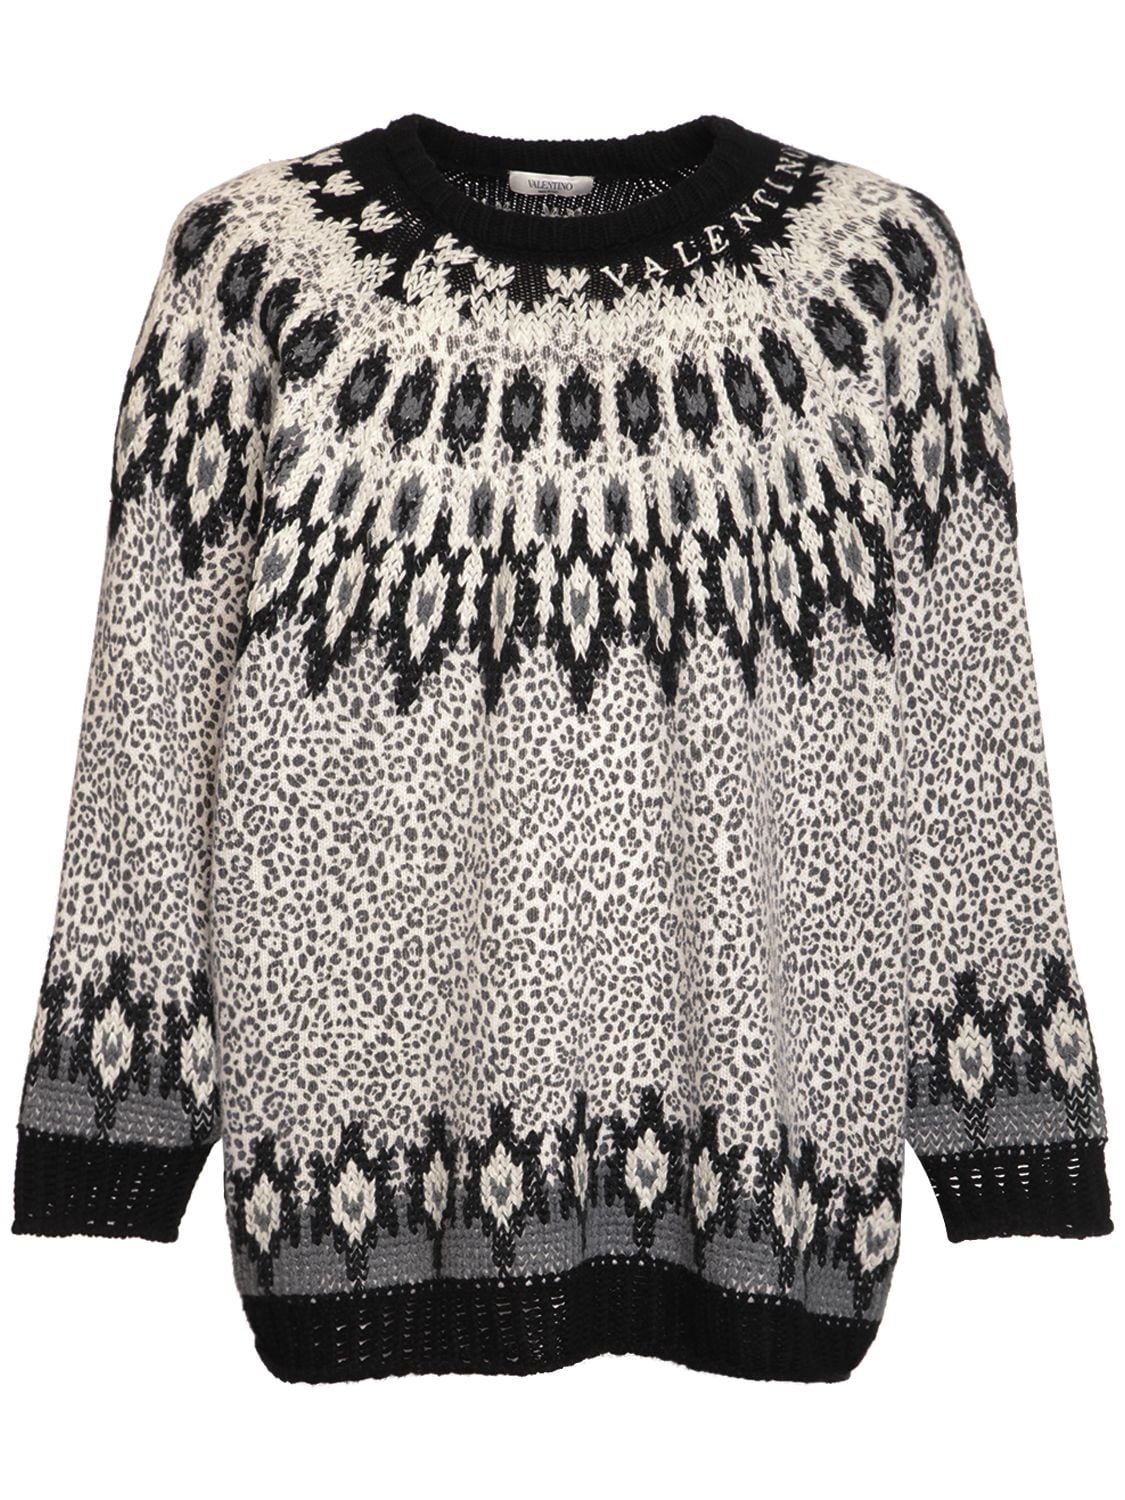 VALENTINO PRINTED & EMBROIDERED WOOL KNIT jumper,74I3GS010-WTYY0